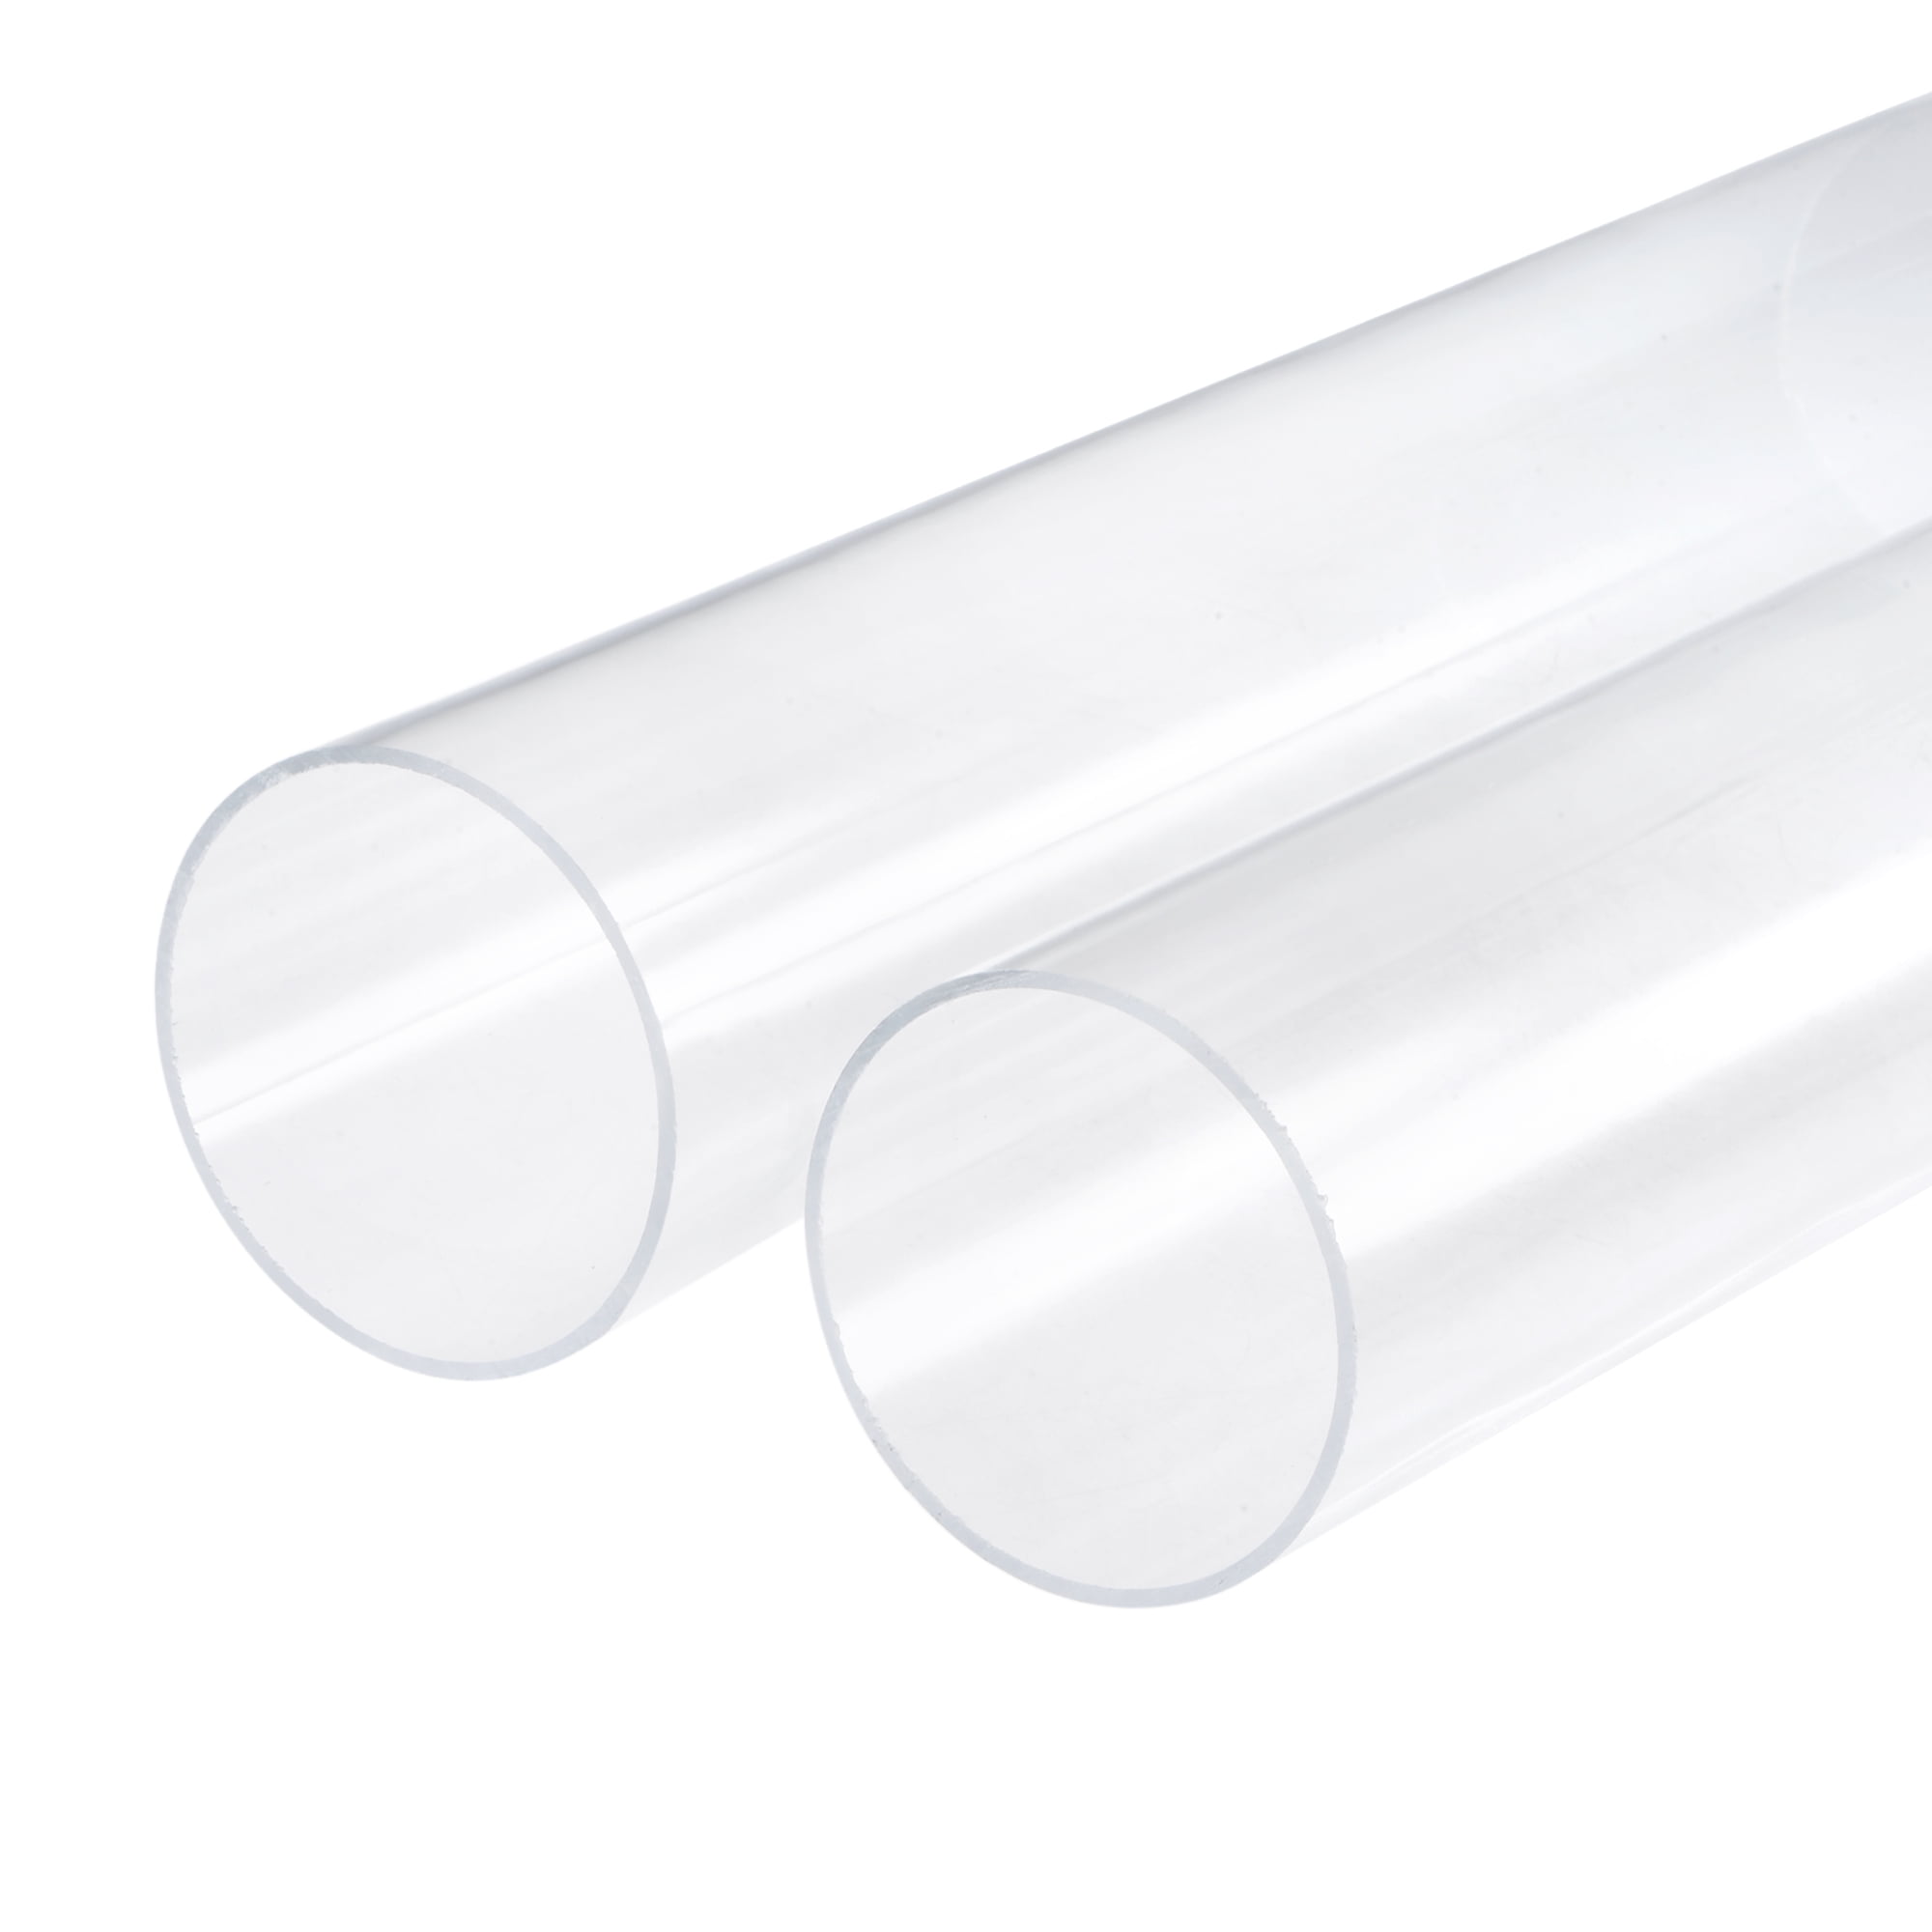 Details about   Clear Rigid Acrylic Pipe 61mm ID x 65mm OD x 305mm 2mm Wall Tube 